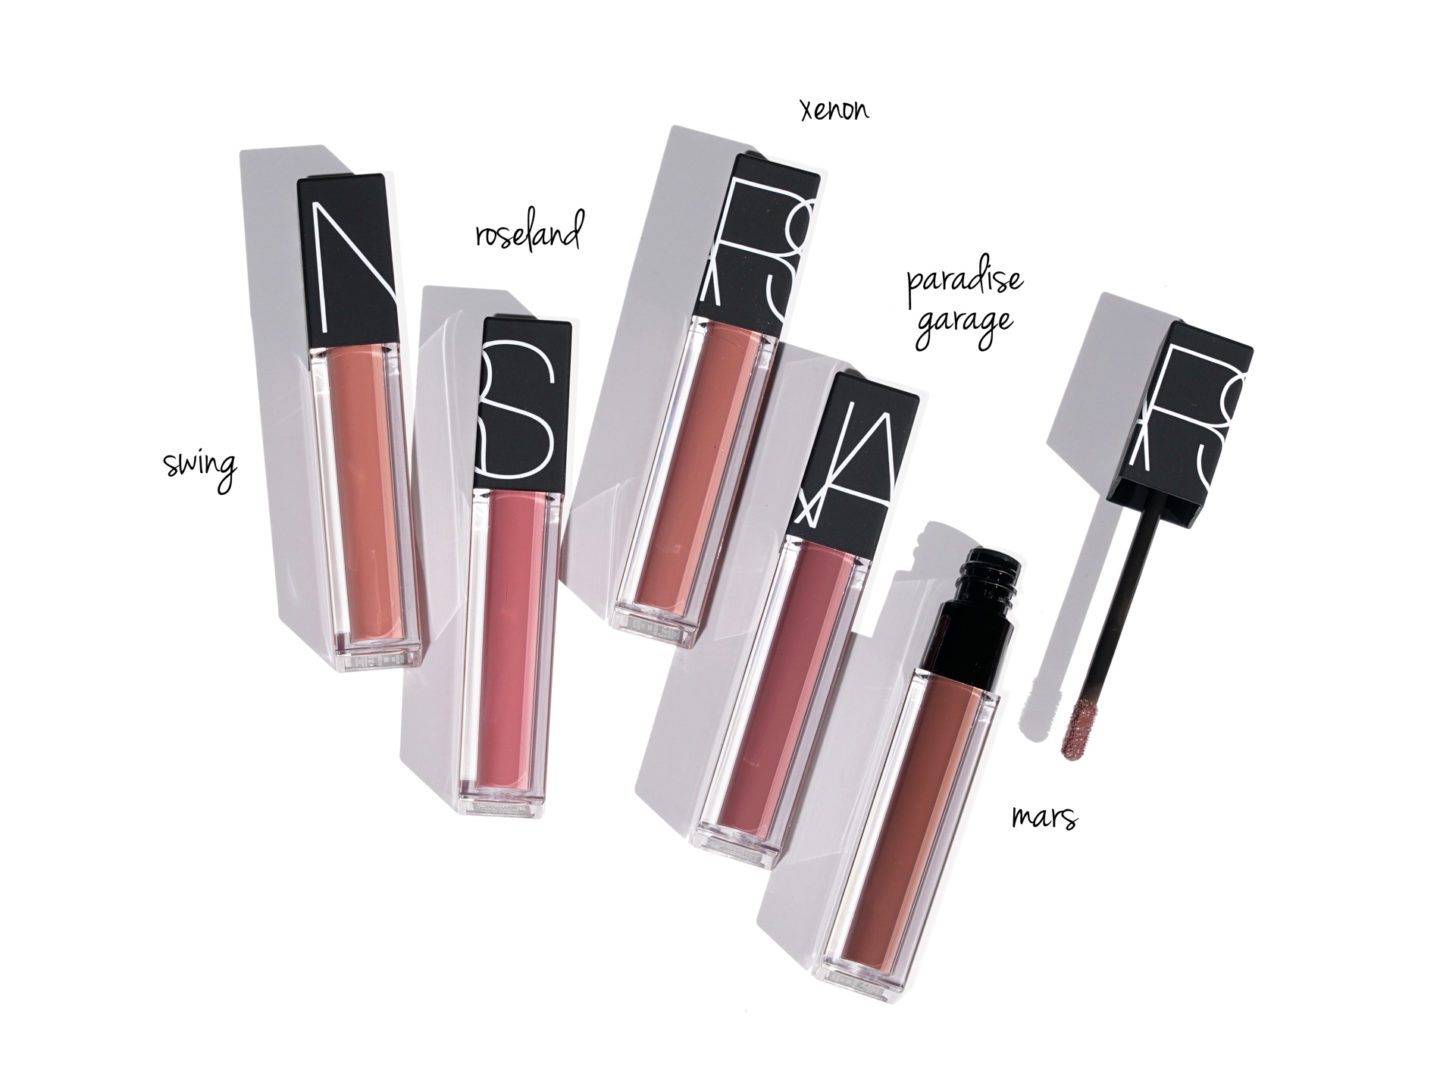 NARS Velvet Lip Glide New Shades Swing, Roseland, Xenon, Paradise Garage and Mars review + swatches